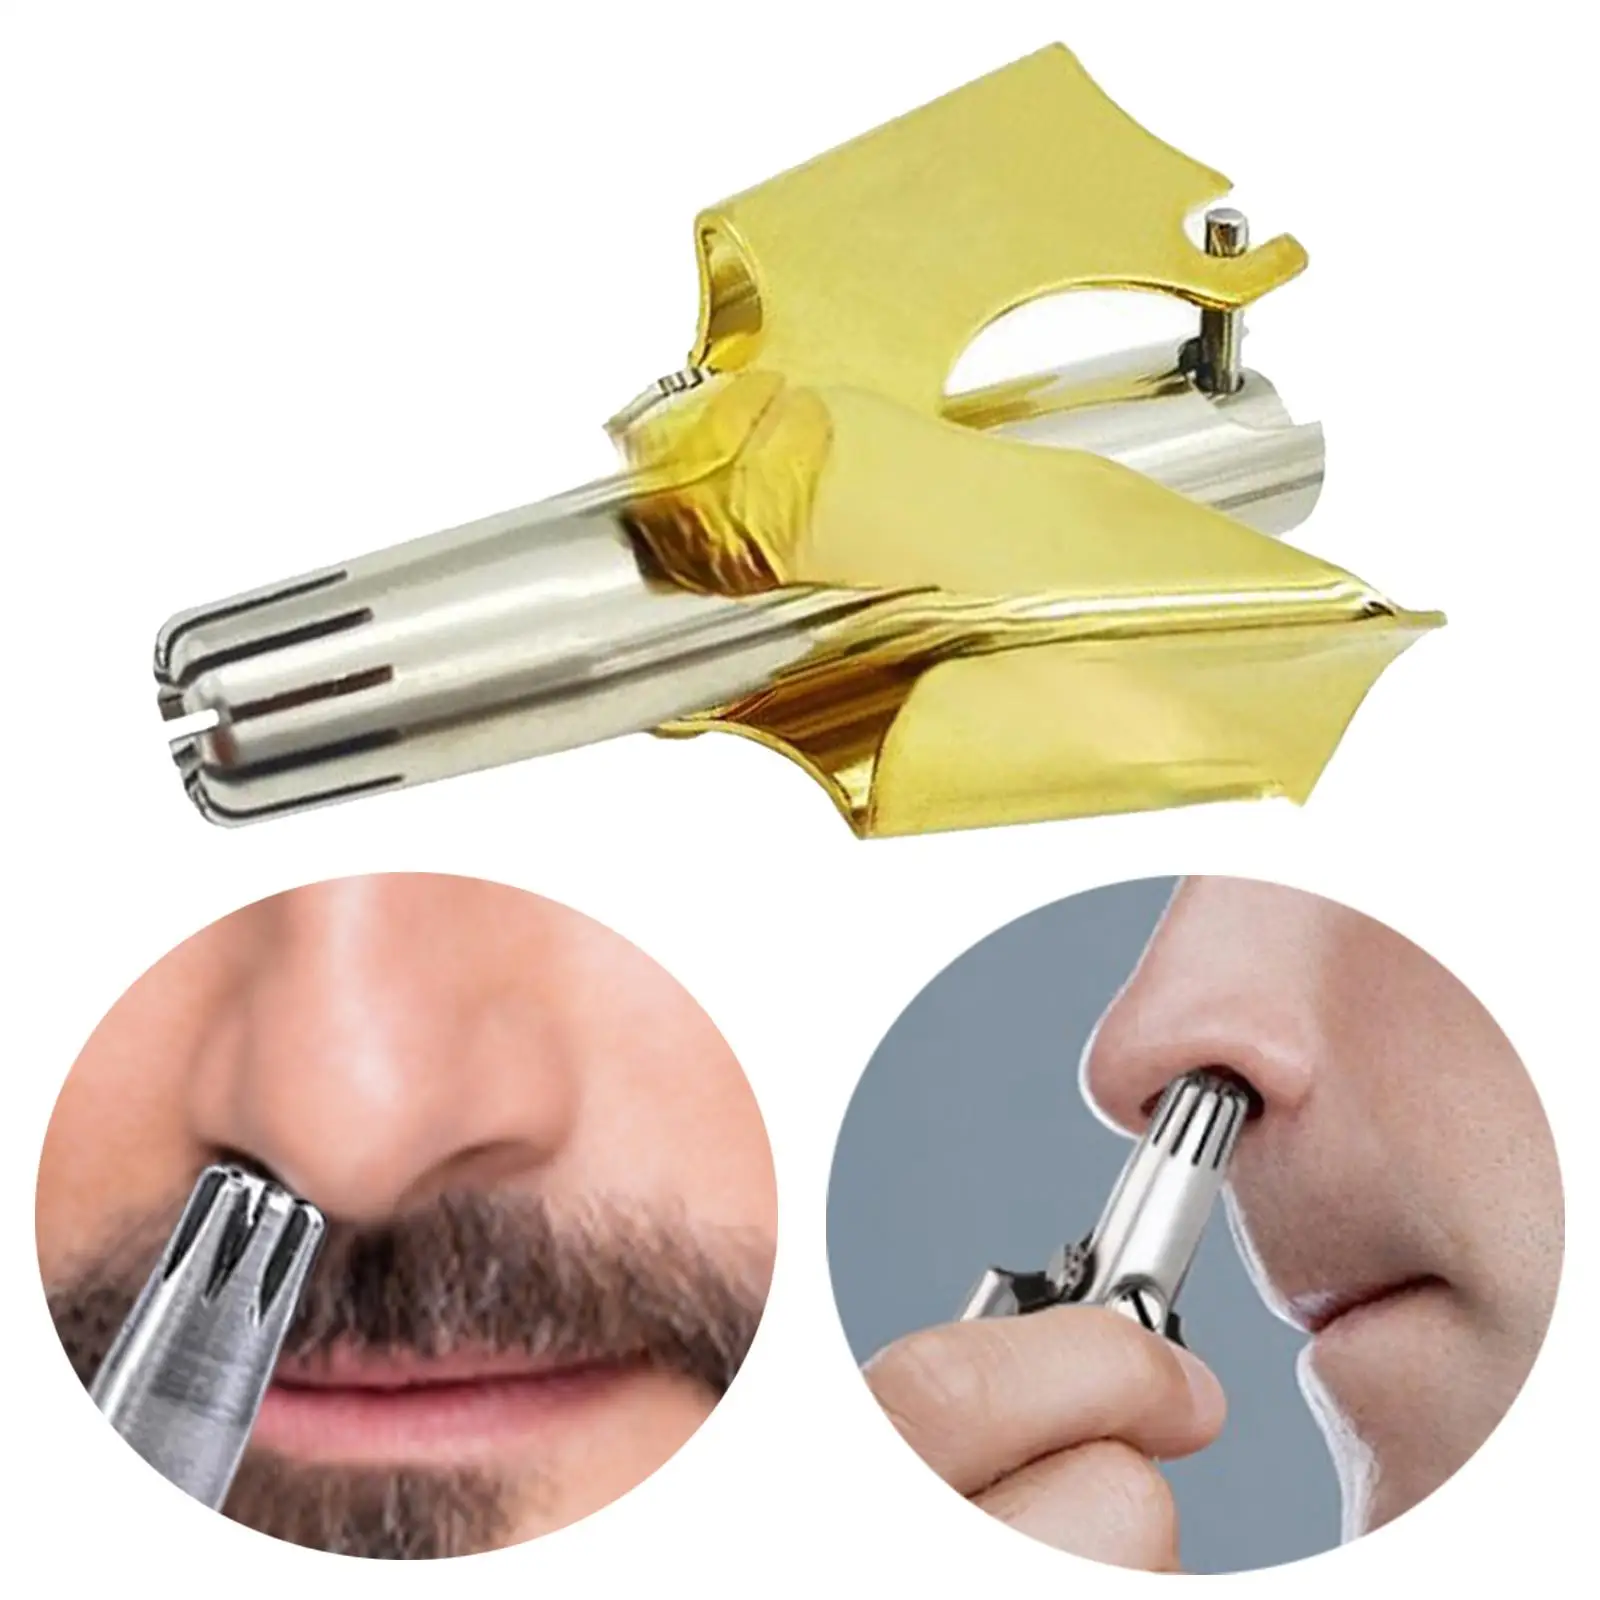 Mini Nose & Ear Hair Trimmer Whole Body Washable Nose Razor Shaver Low Manual Noise No Battery for Men Women Gift Silver Gold